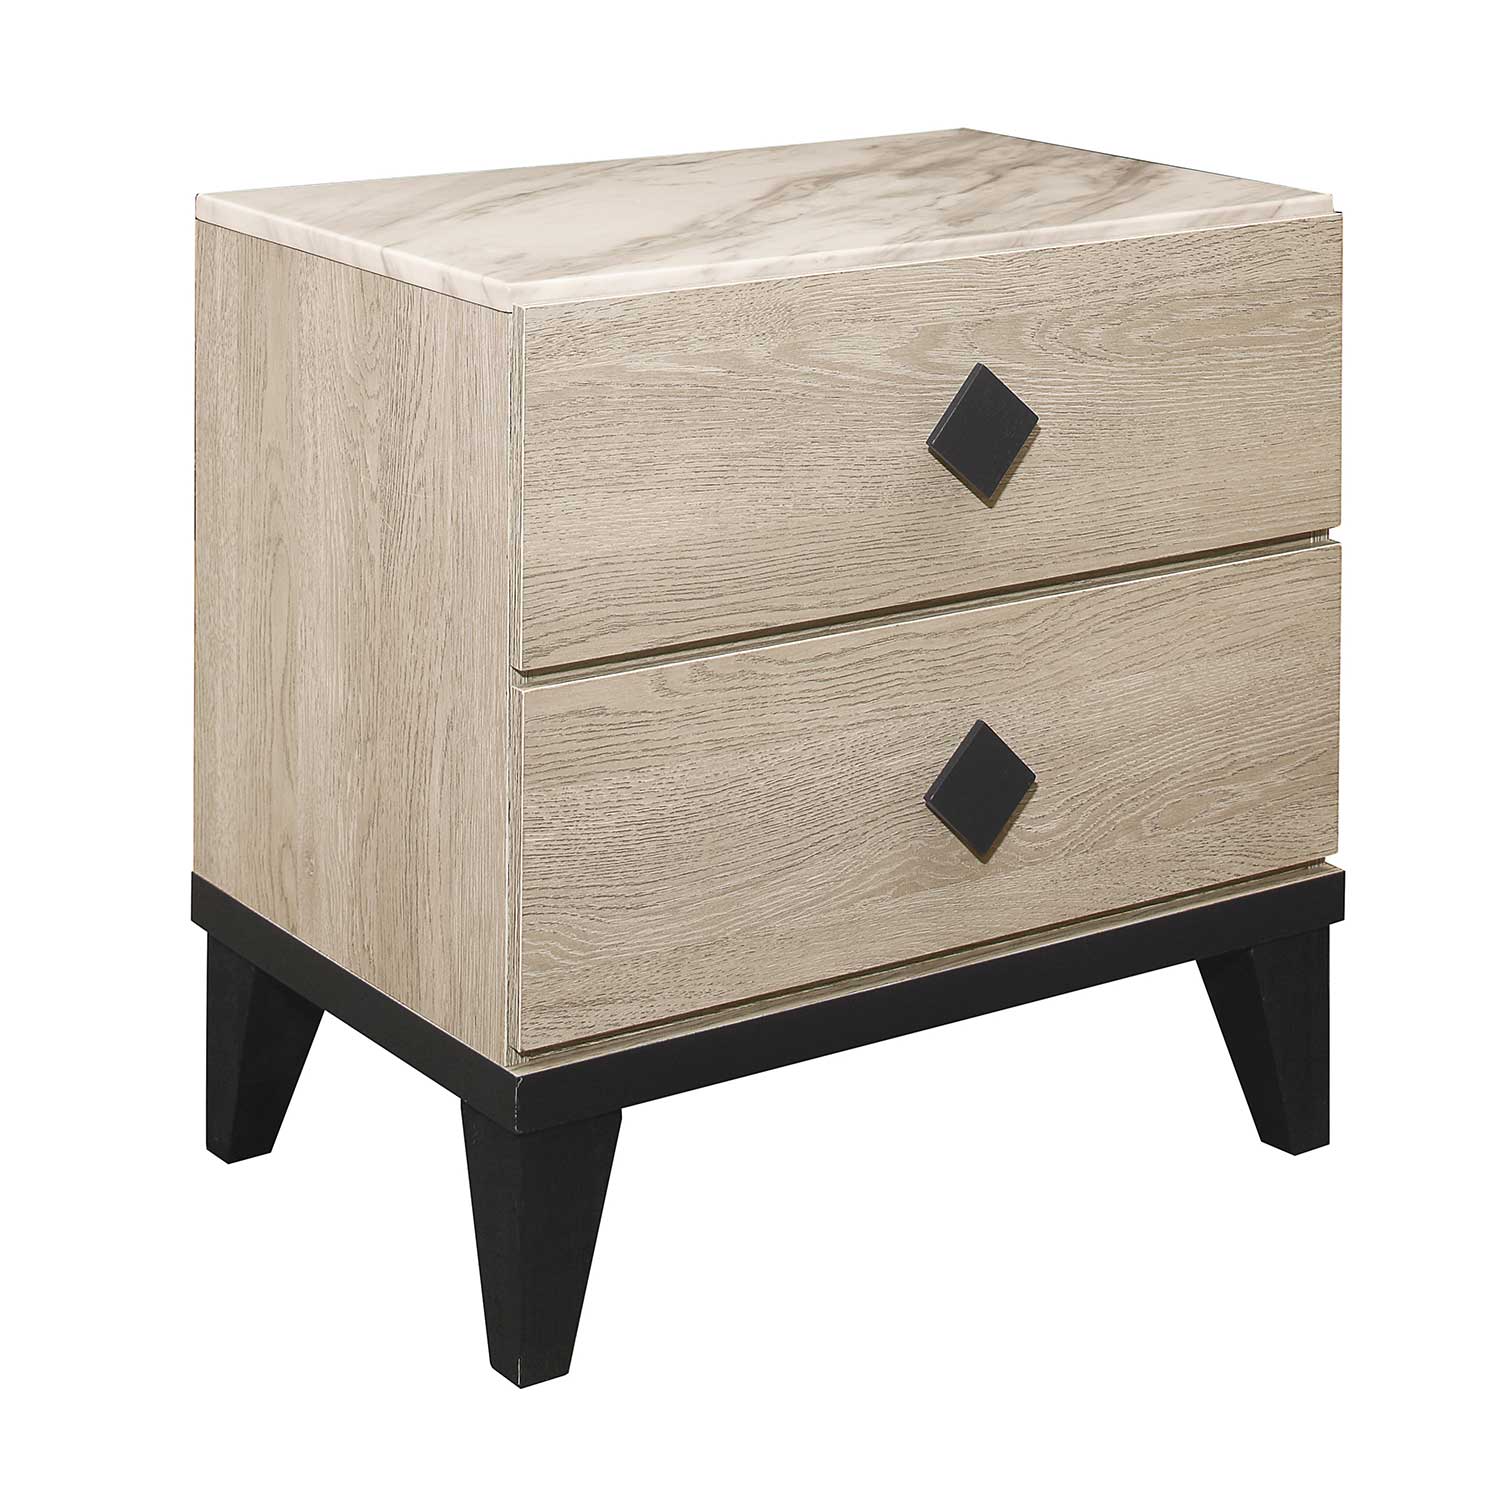 Homelegance Whiting Night Stand - Cream and Black